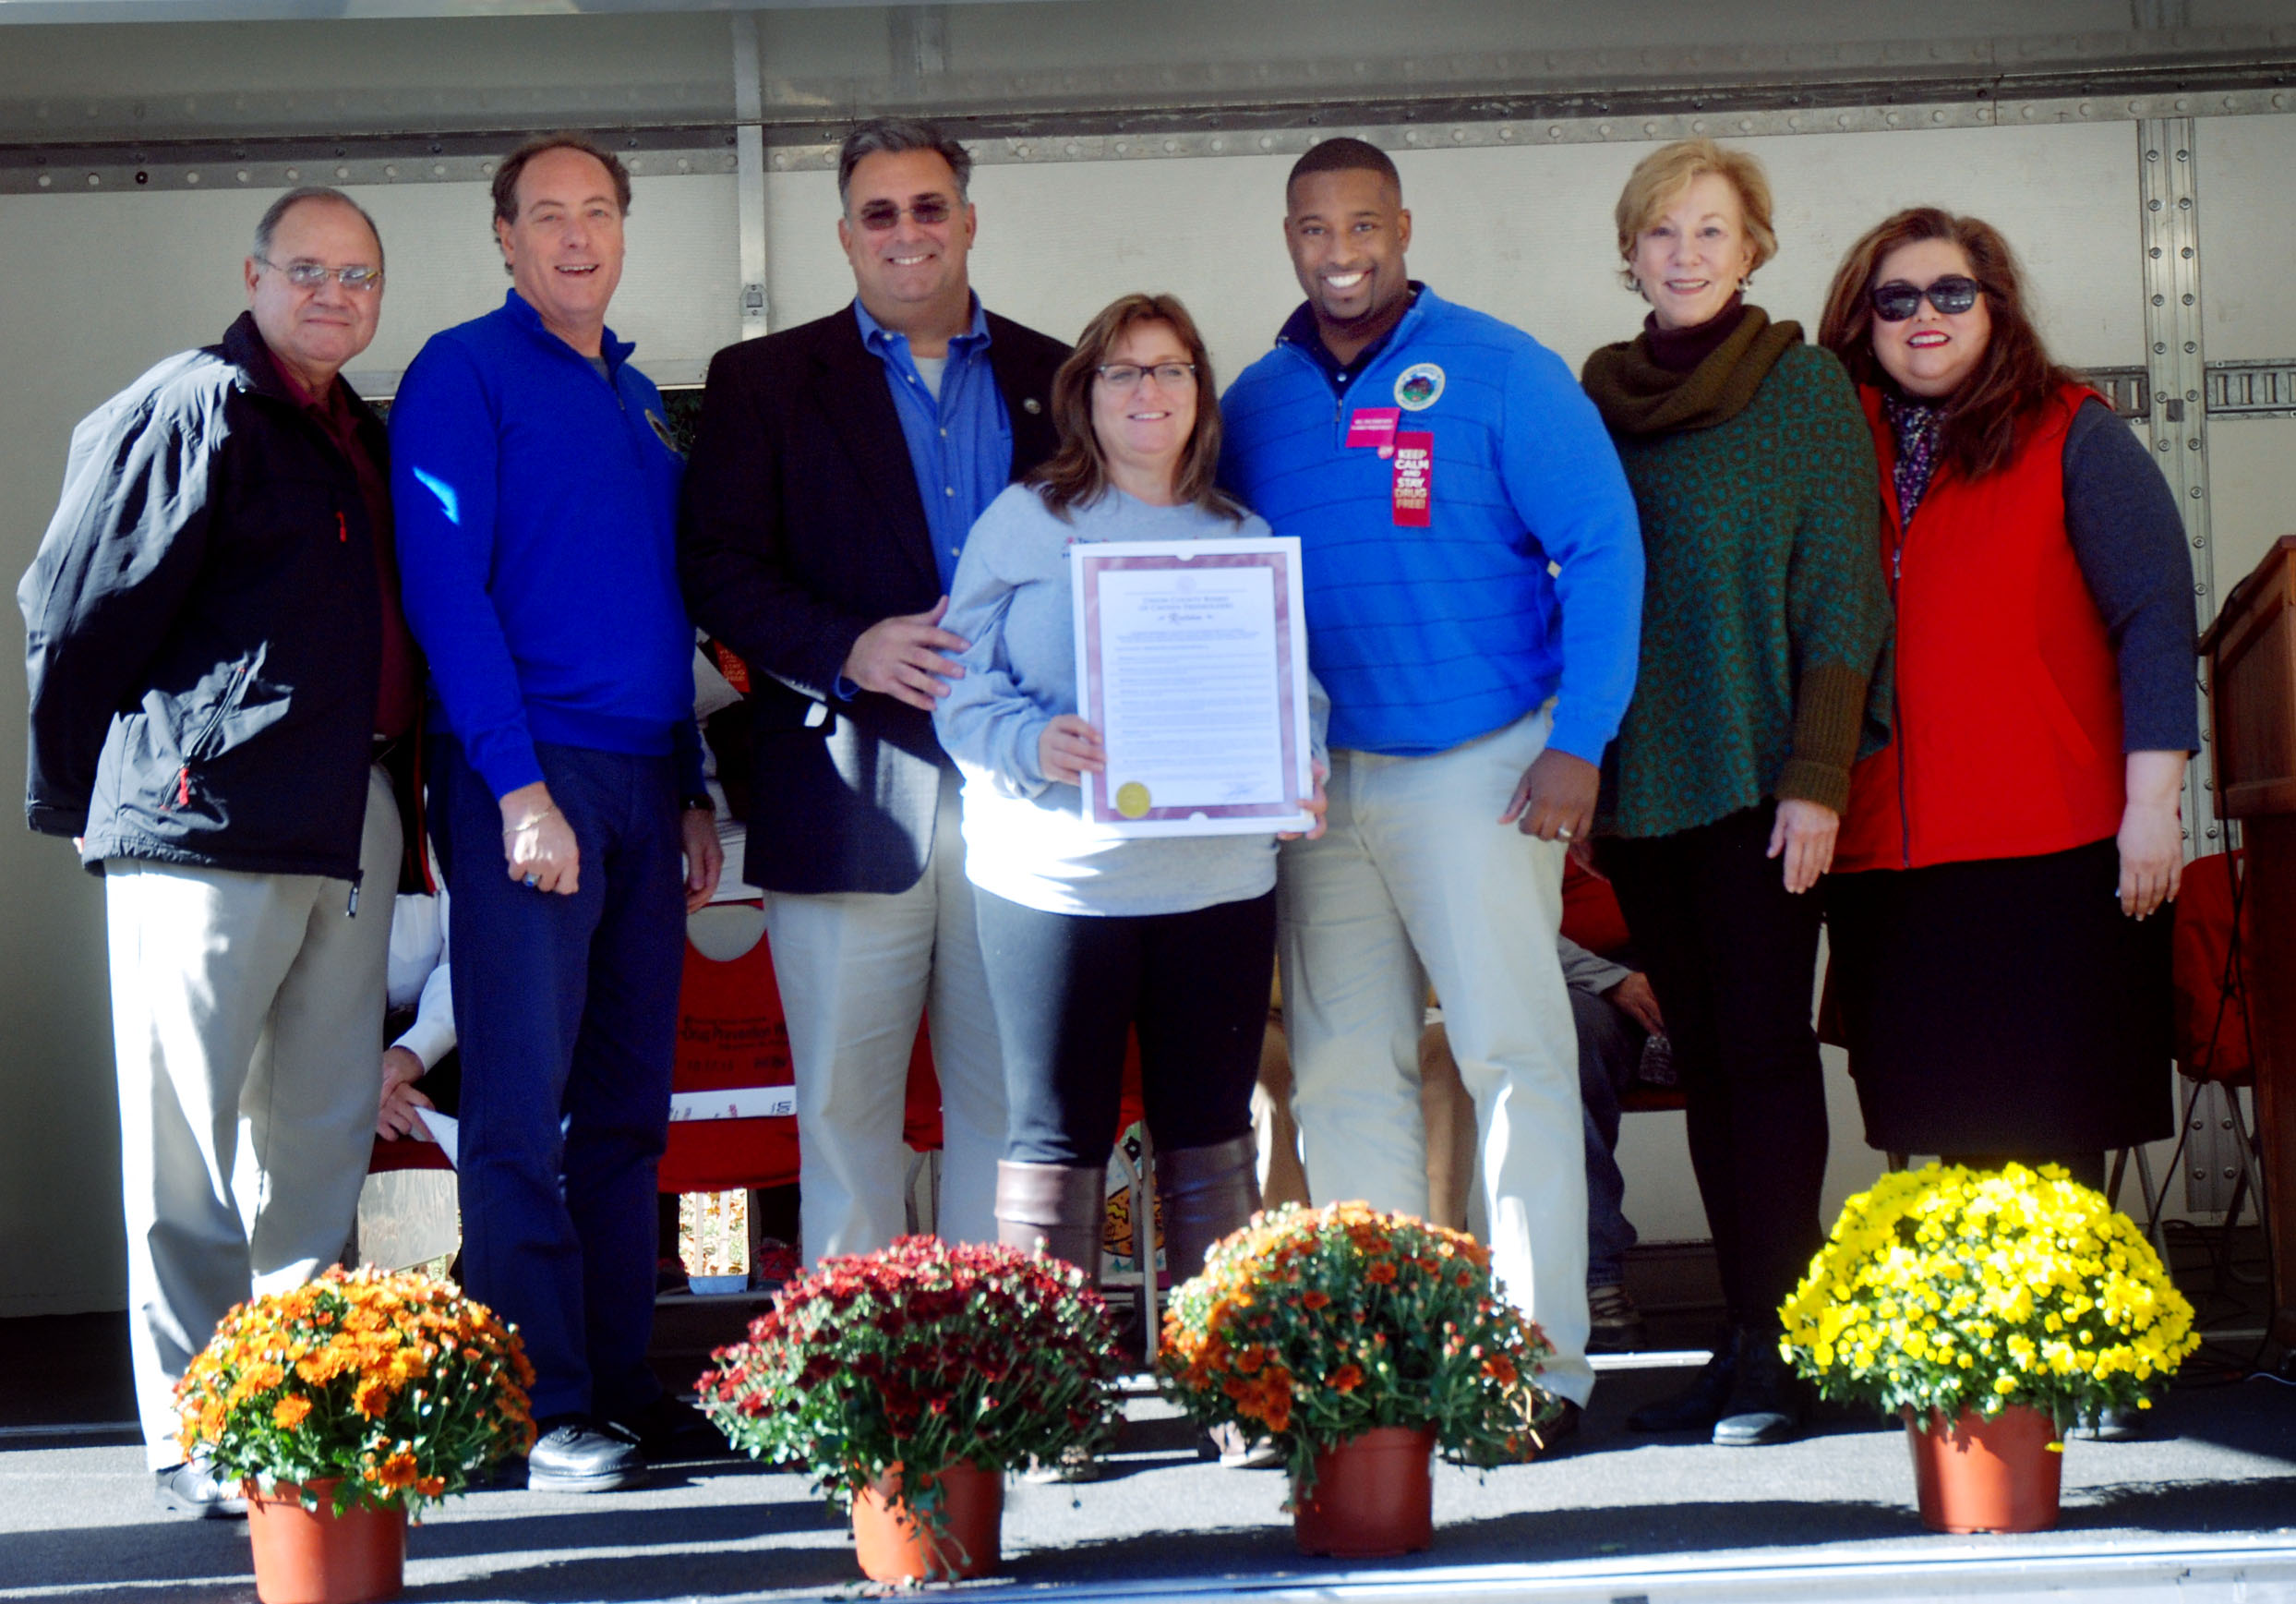 Red Ribbon Day Drug Prevention Walk – County of Union, New Jersey